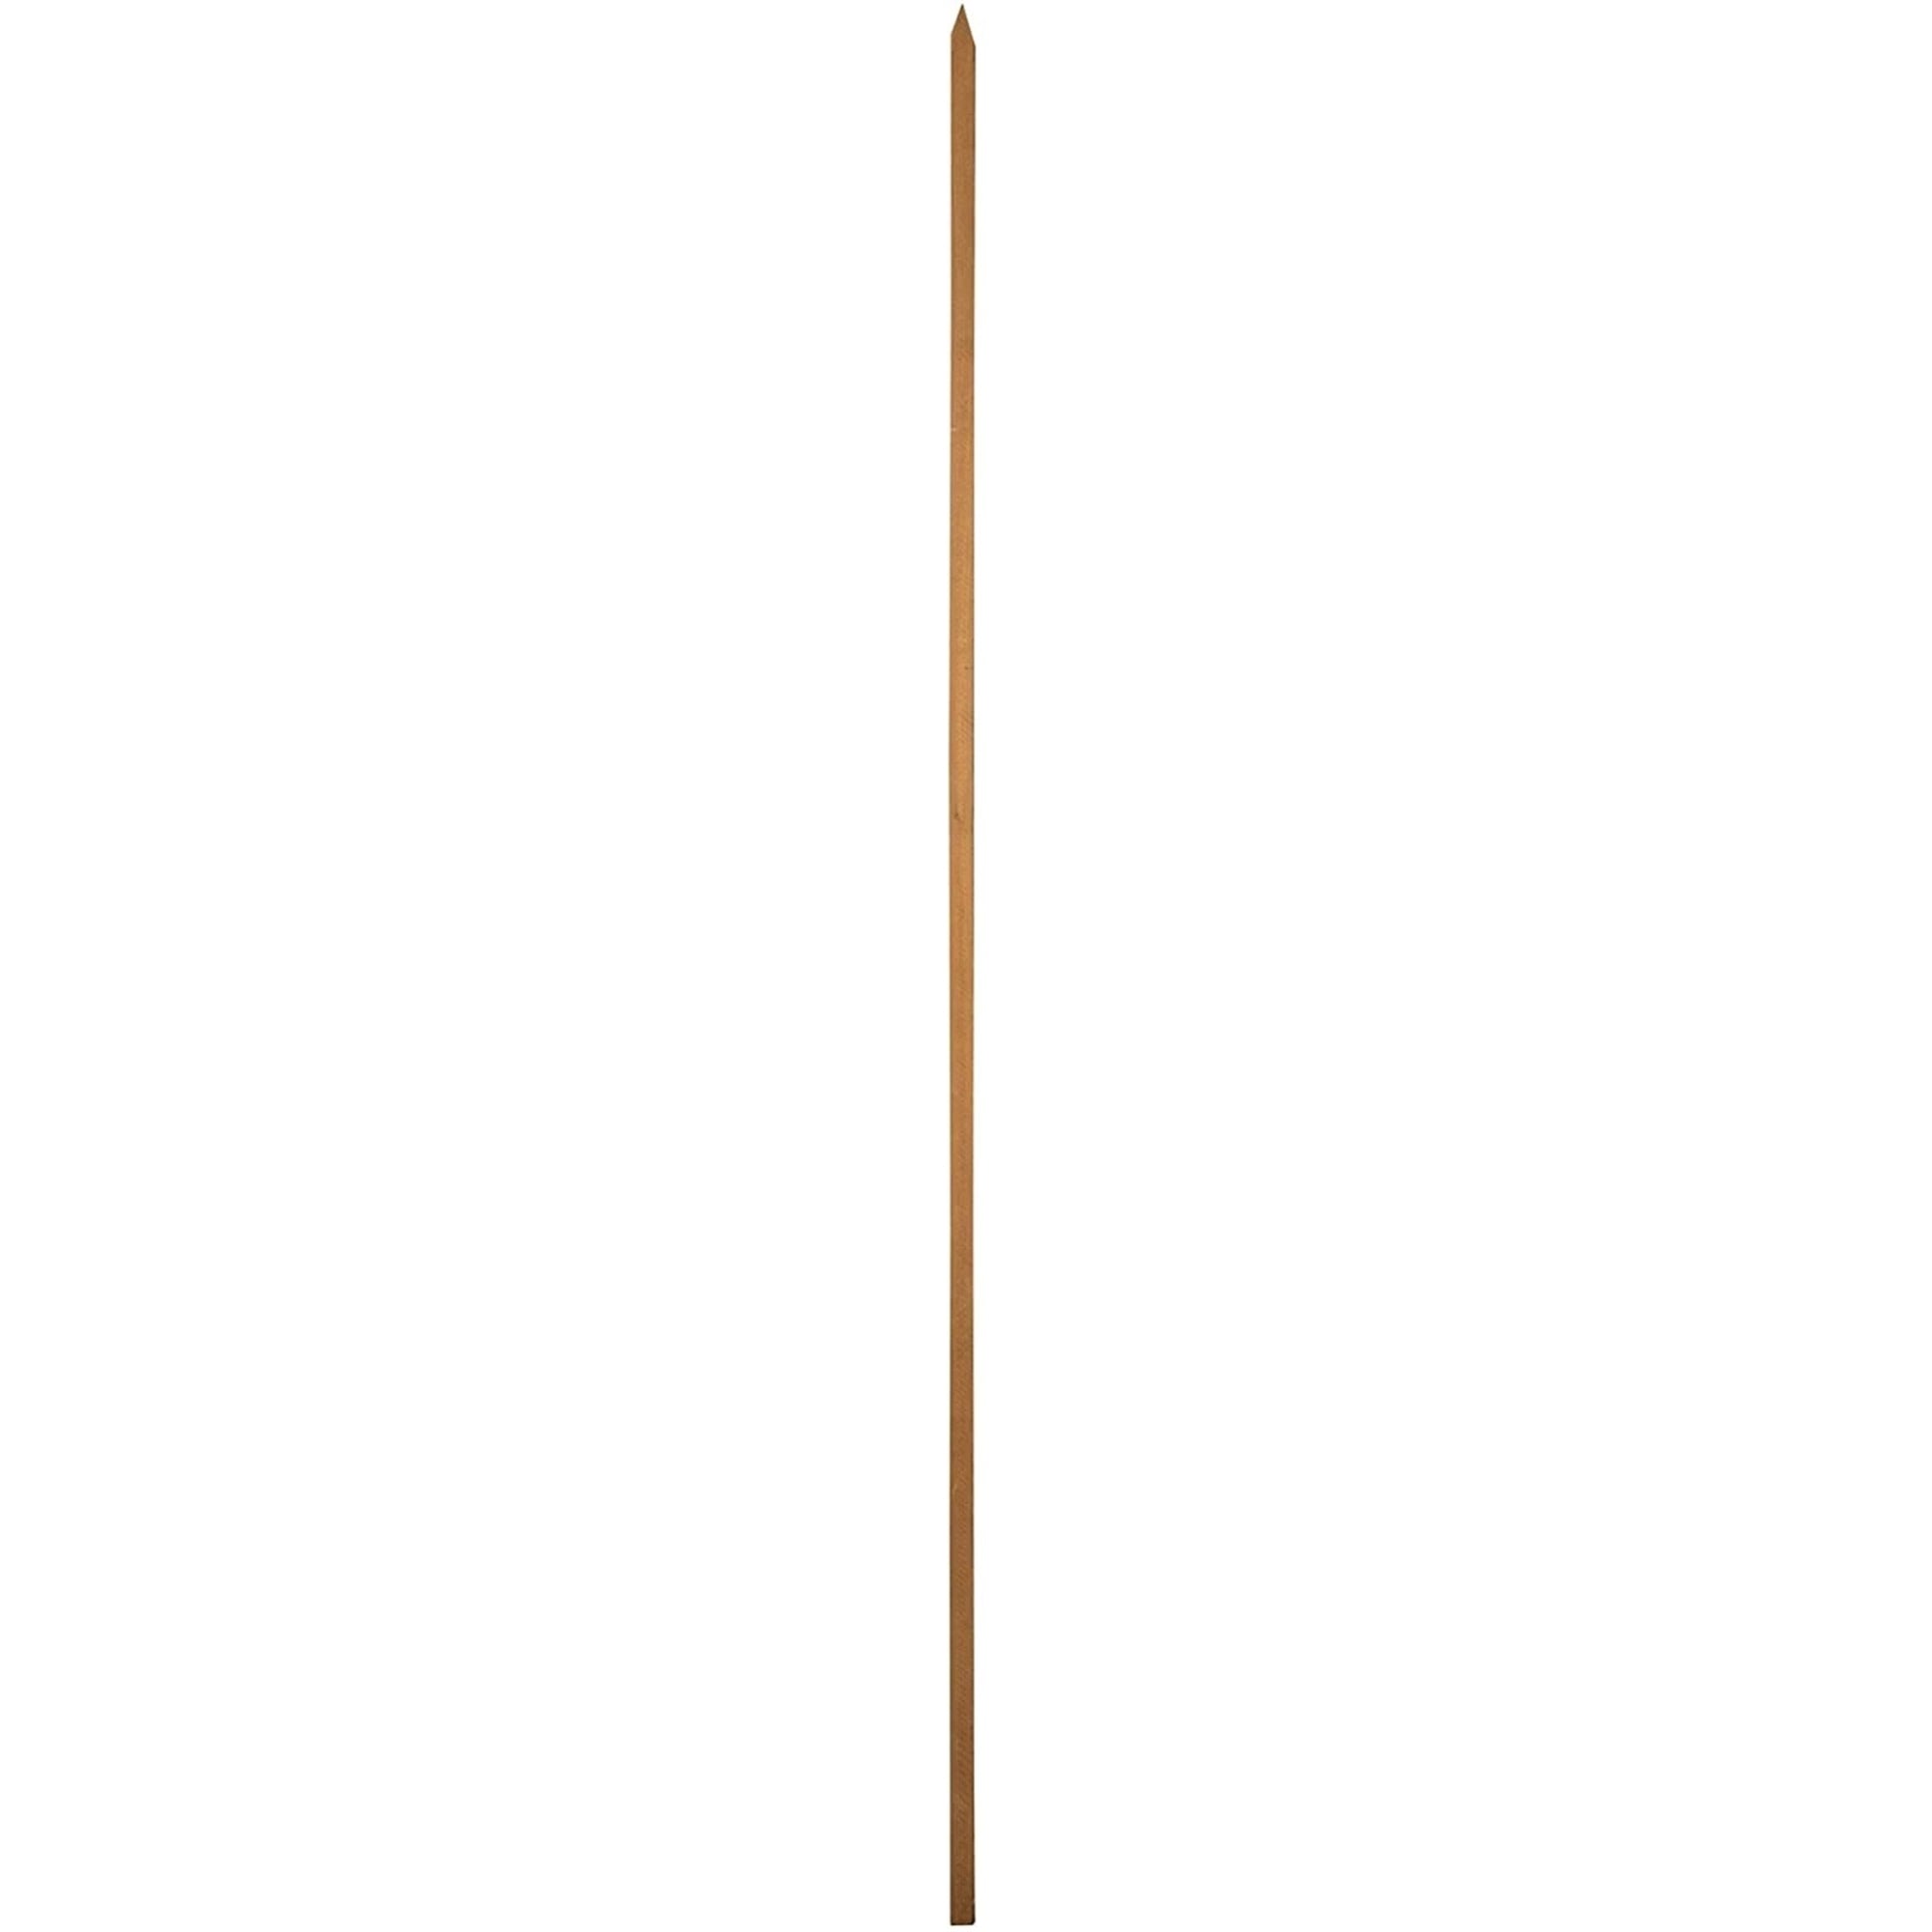 Bond Manufacturing Packaged Hardwood Stakes, 0.75 x 0.75 x 4', Natural (6 Pack)